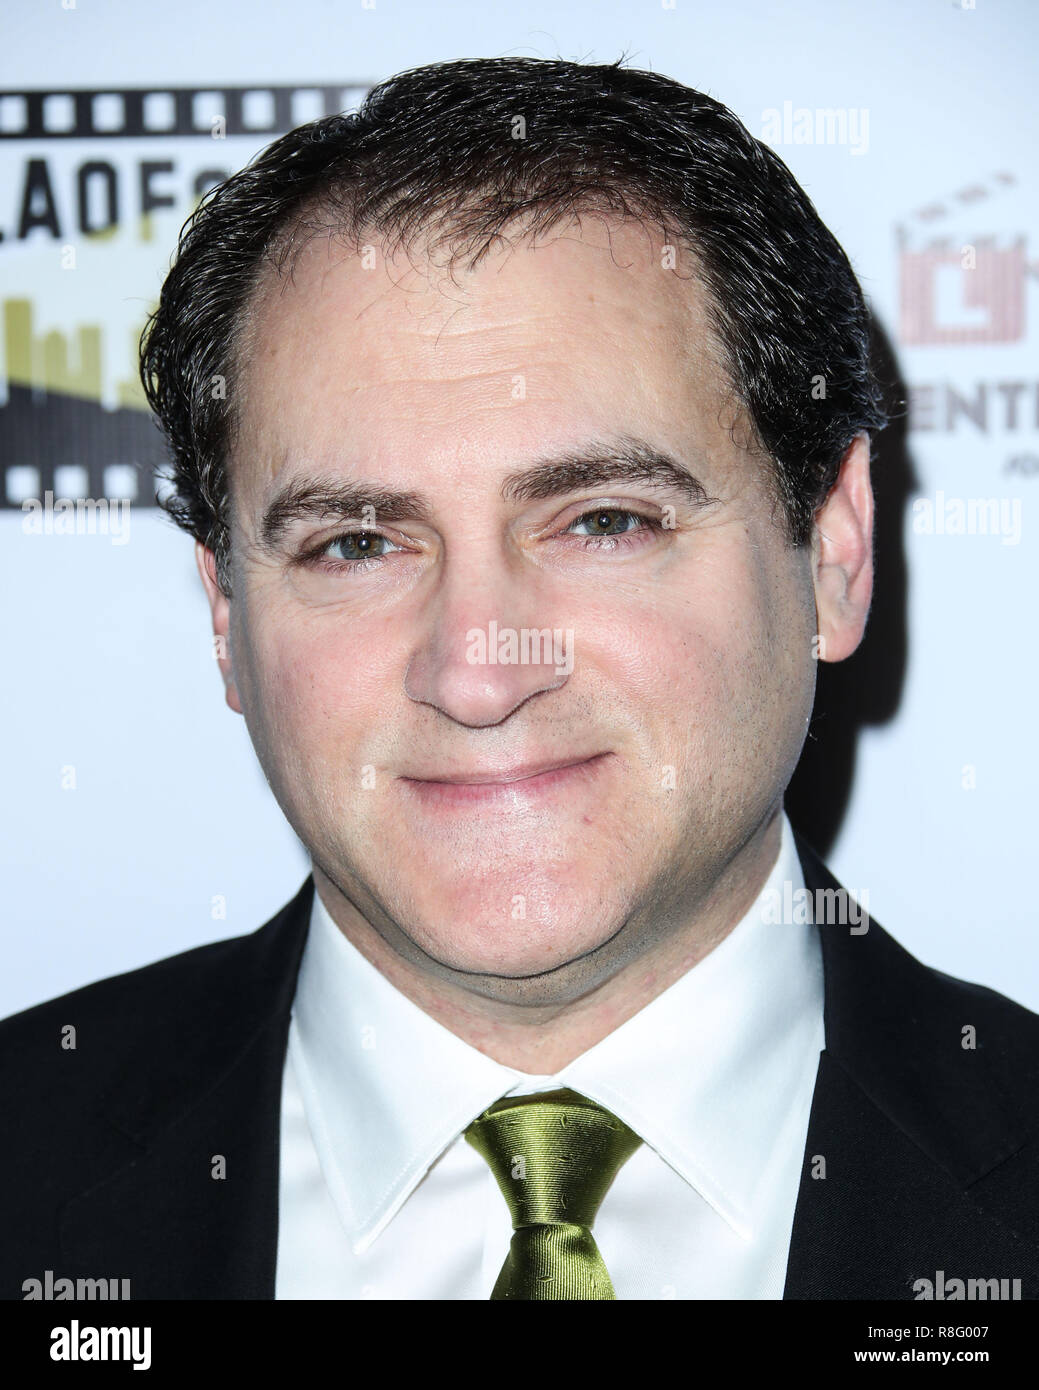 HOLLYWOOD, LOS ANGELES, CA, USA - JANUARY 10: Michael Stuhlbarg at The Inaugural Los Angeles Online Film Critics Society Award Ceremony held at the Taglyan Complex on January 10, 2018 in Hollywood, Los Angeles, California, United States. (Photo by Xavier Collin/Image Press Agency) Stock Photo